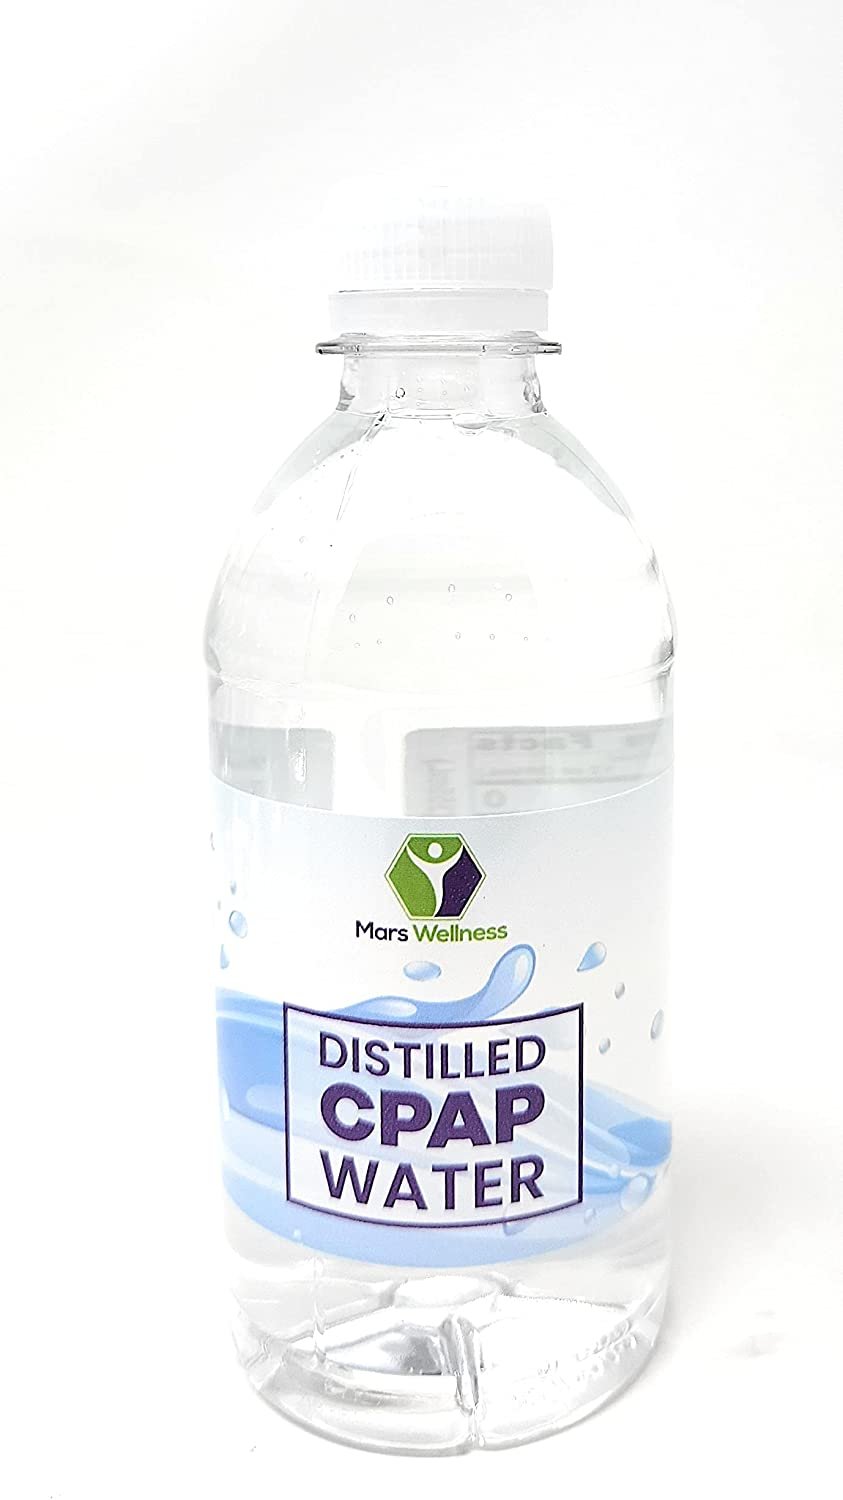 Mars Wellness Distilled Water for CPAP Machines - Distilled Water for Humidifier, Medical Sterilization, Facial Steamer, Cosmetic Purposes, and More - CPAP Water for Travel - 16.9oz Bottles